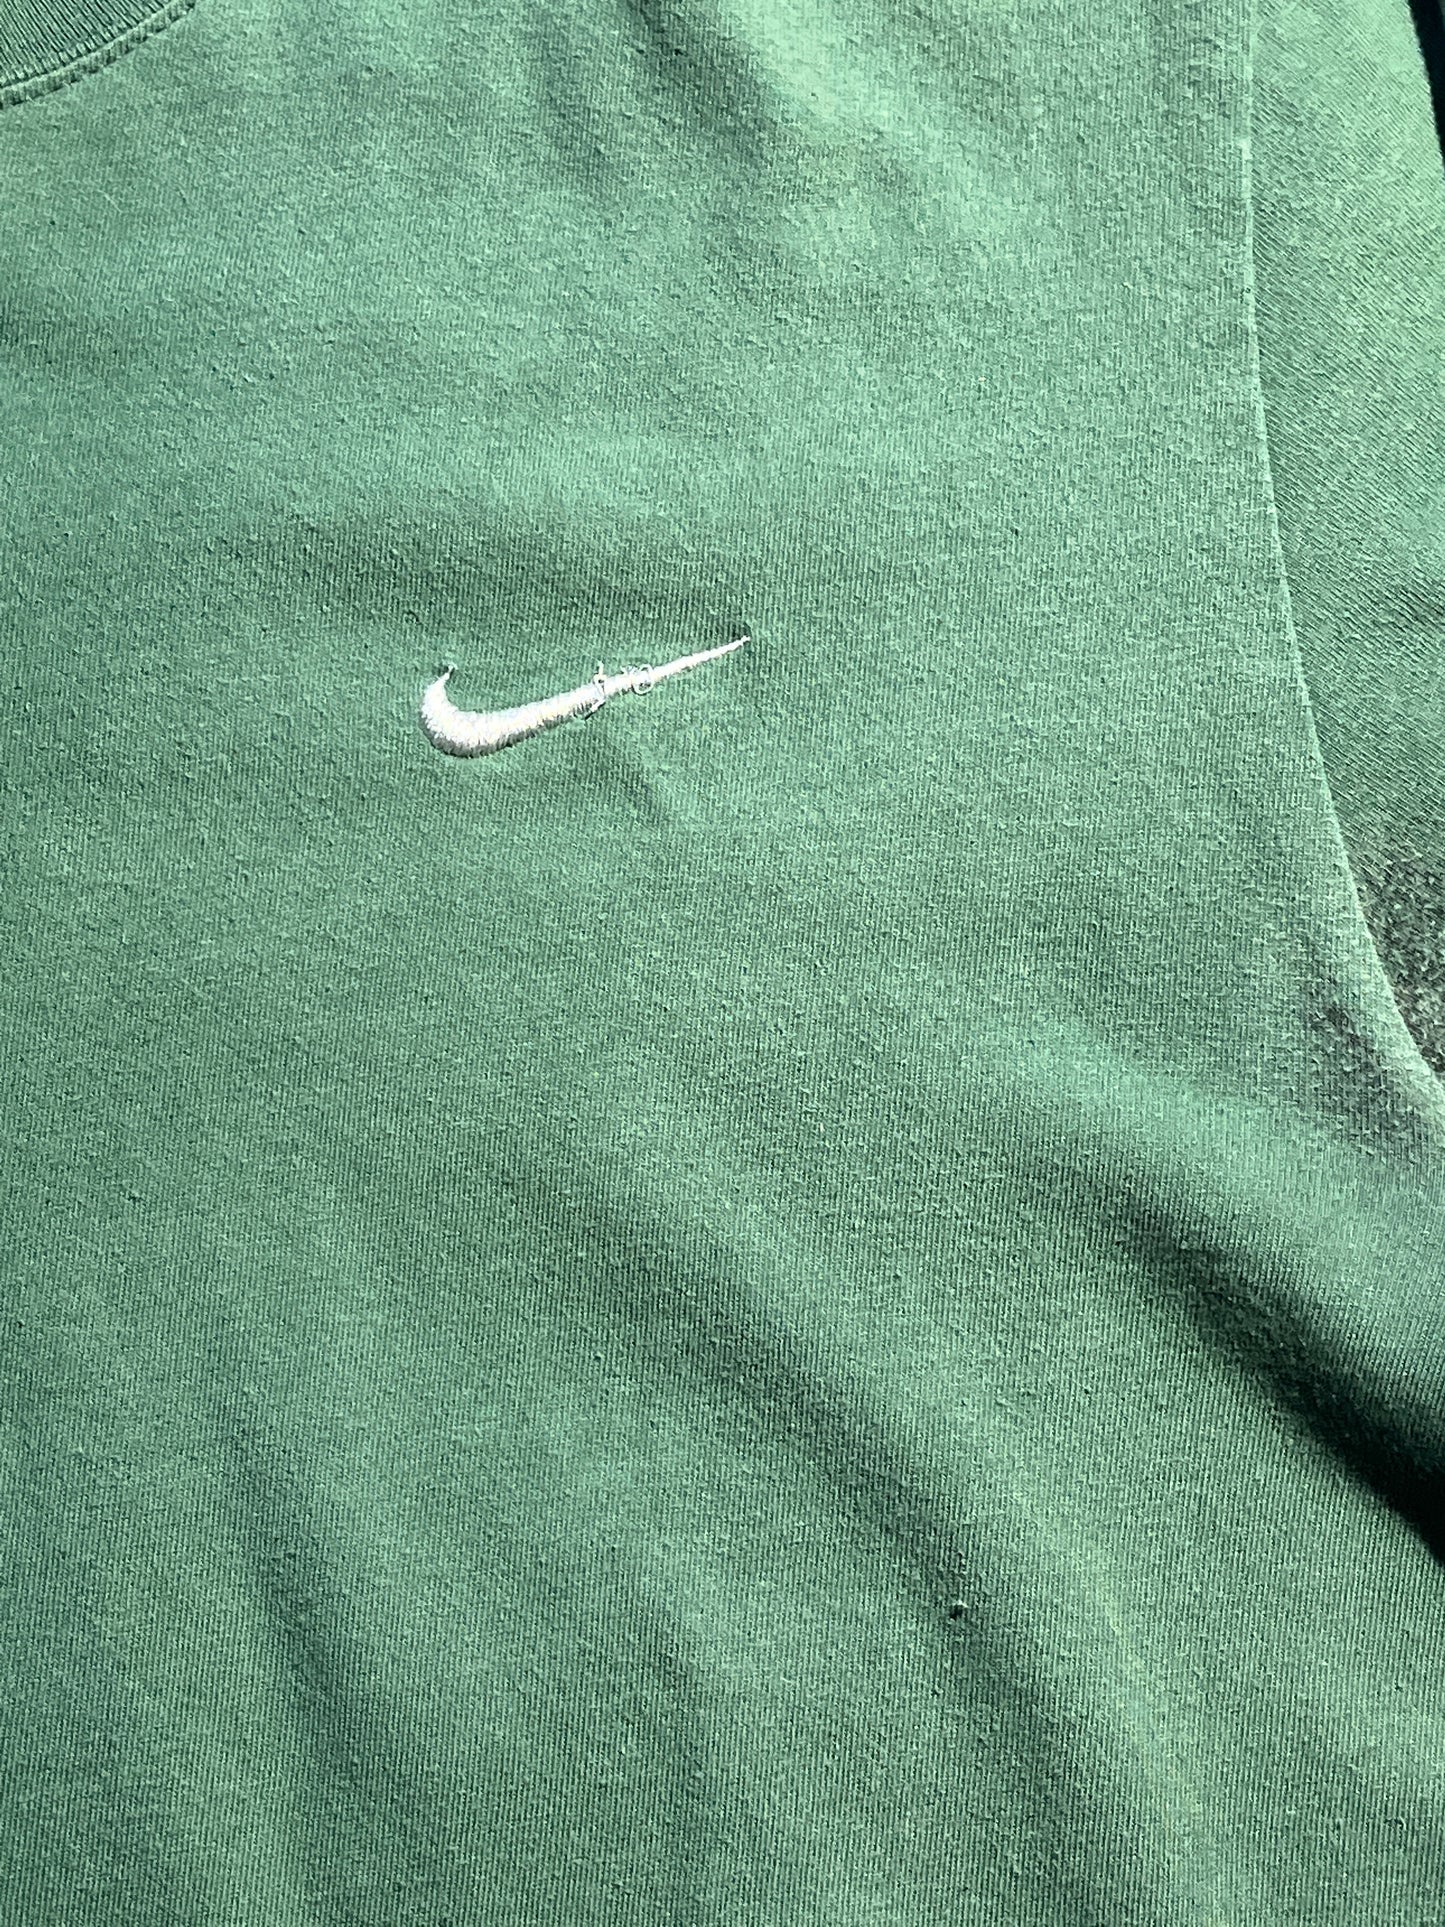 Vintage Nike Shirt Emerald Green AS - IS